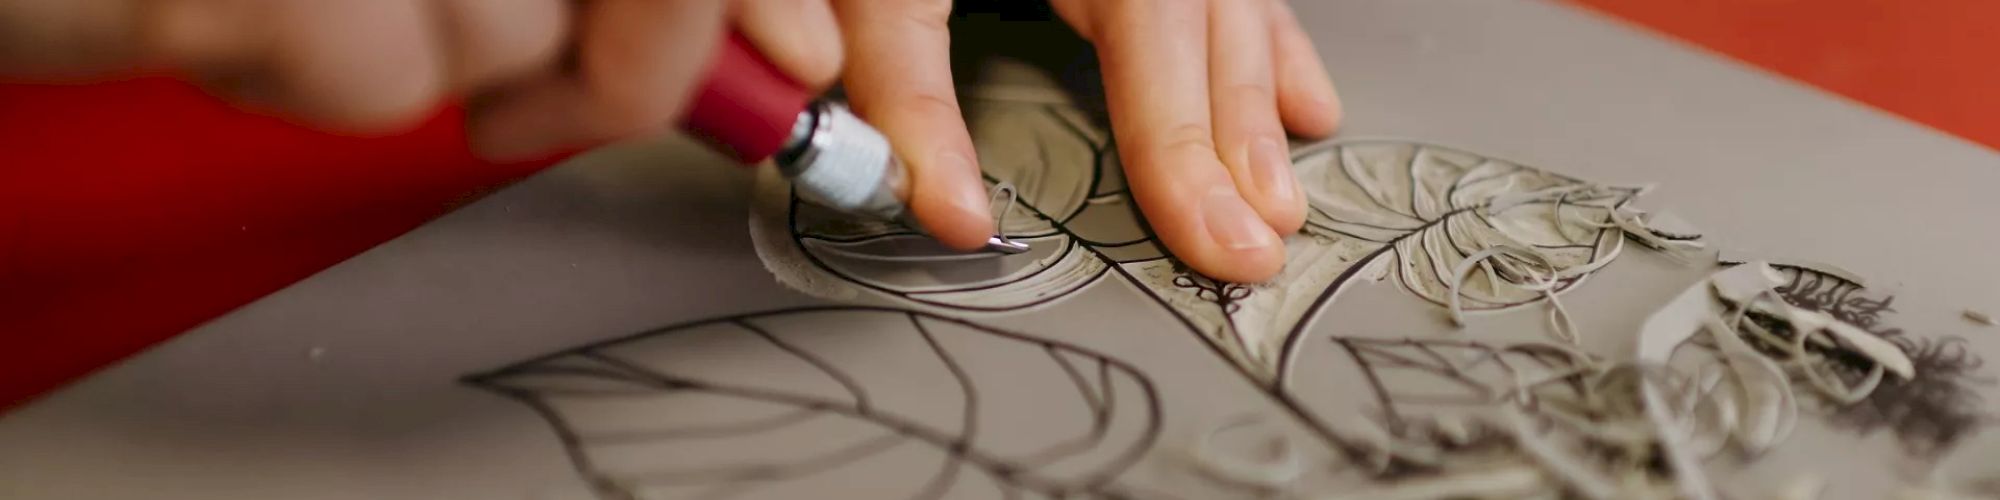 A person is using a carving tool to create an intricate design with leaves and flowers on a piece of material, possibly linoleum or wood.